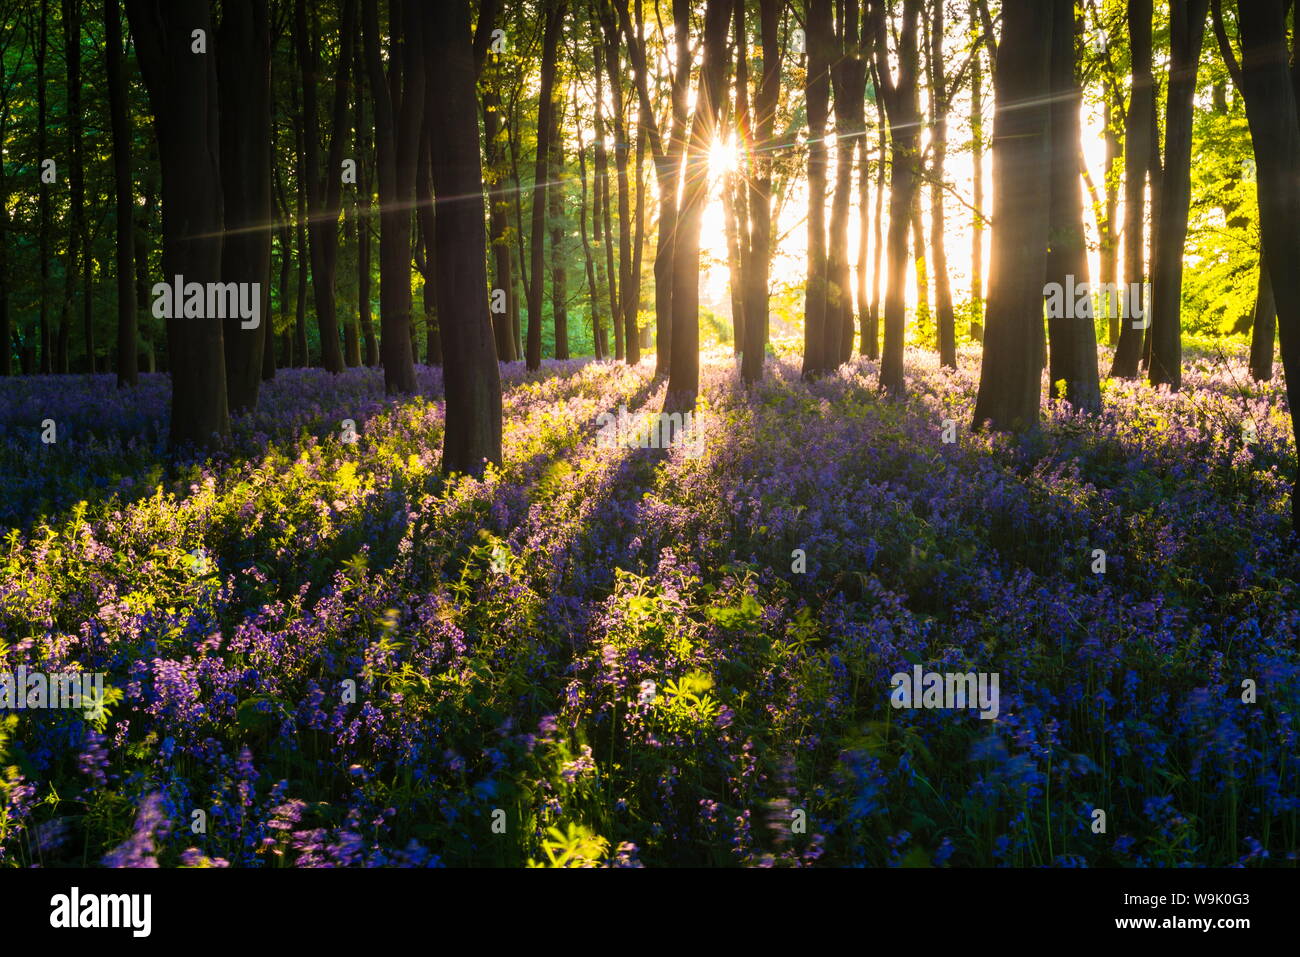 Bluebells in Bluebell woods in spring, Badbury Clump at Badbury Hill, Oxford, Oxfordshire, England, United Kingdom, Europe Stock Photo